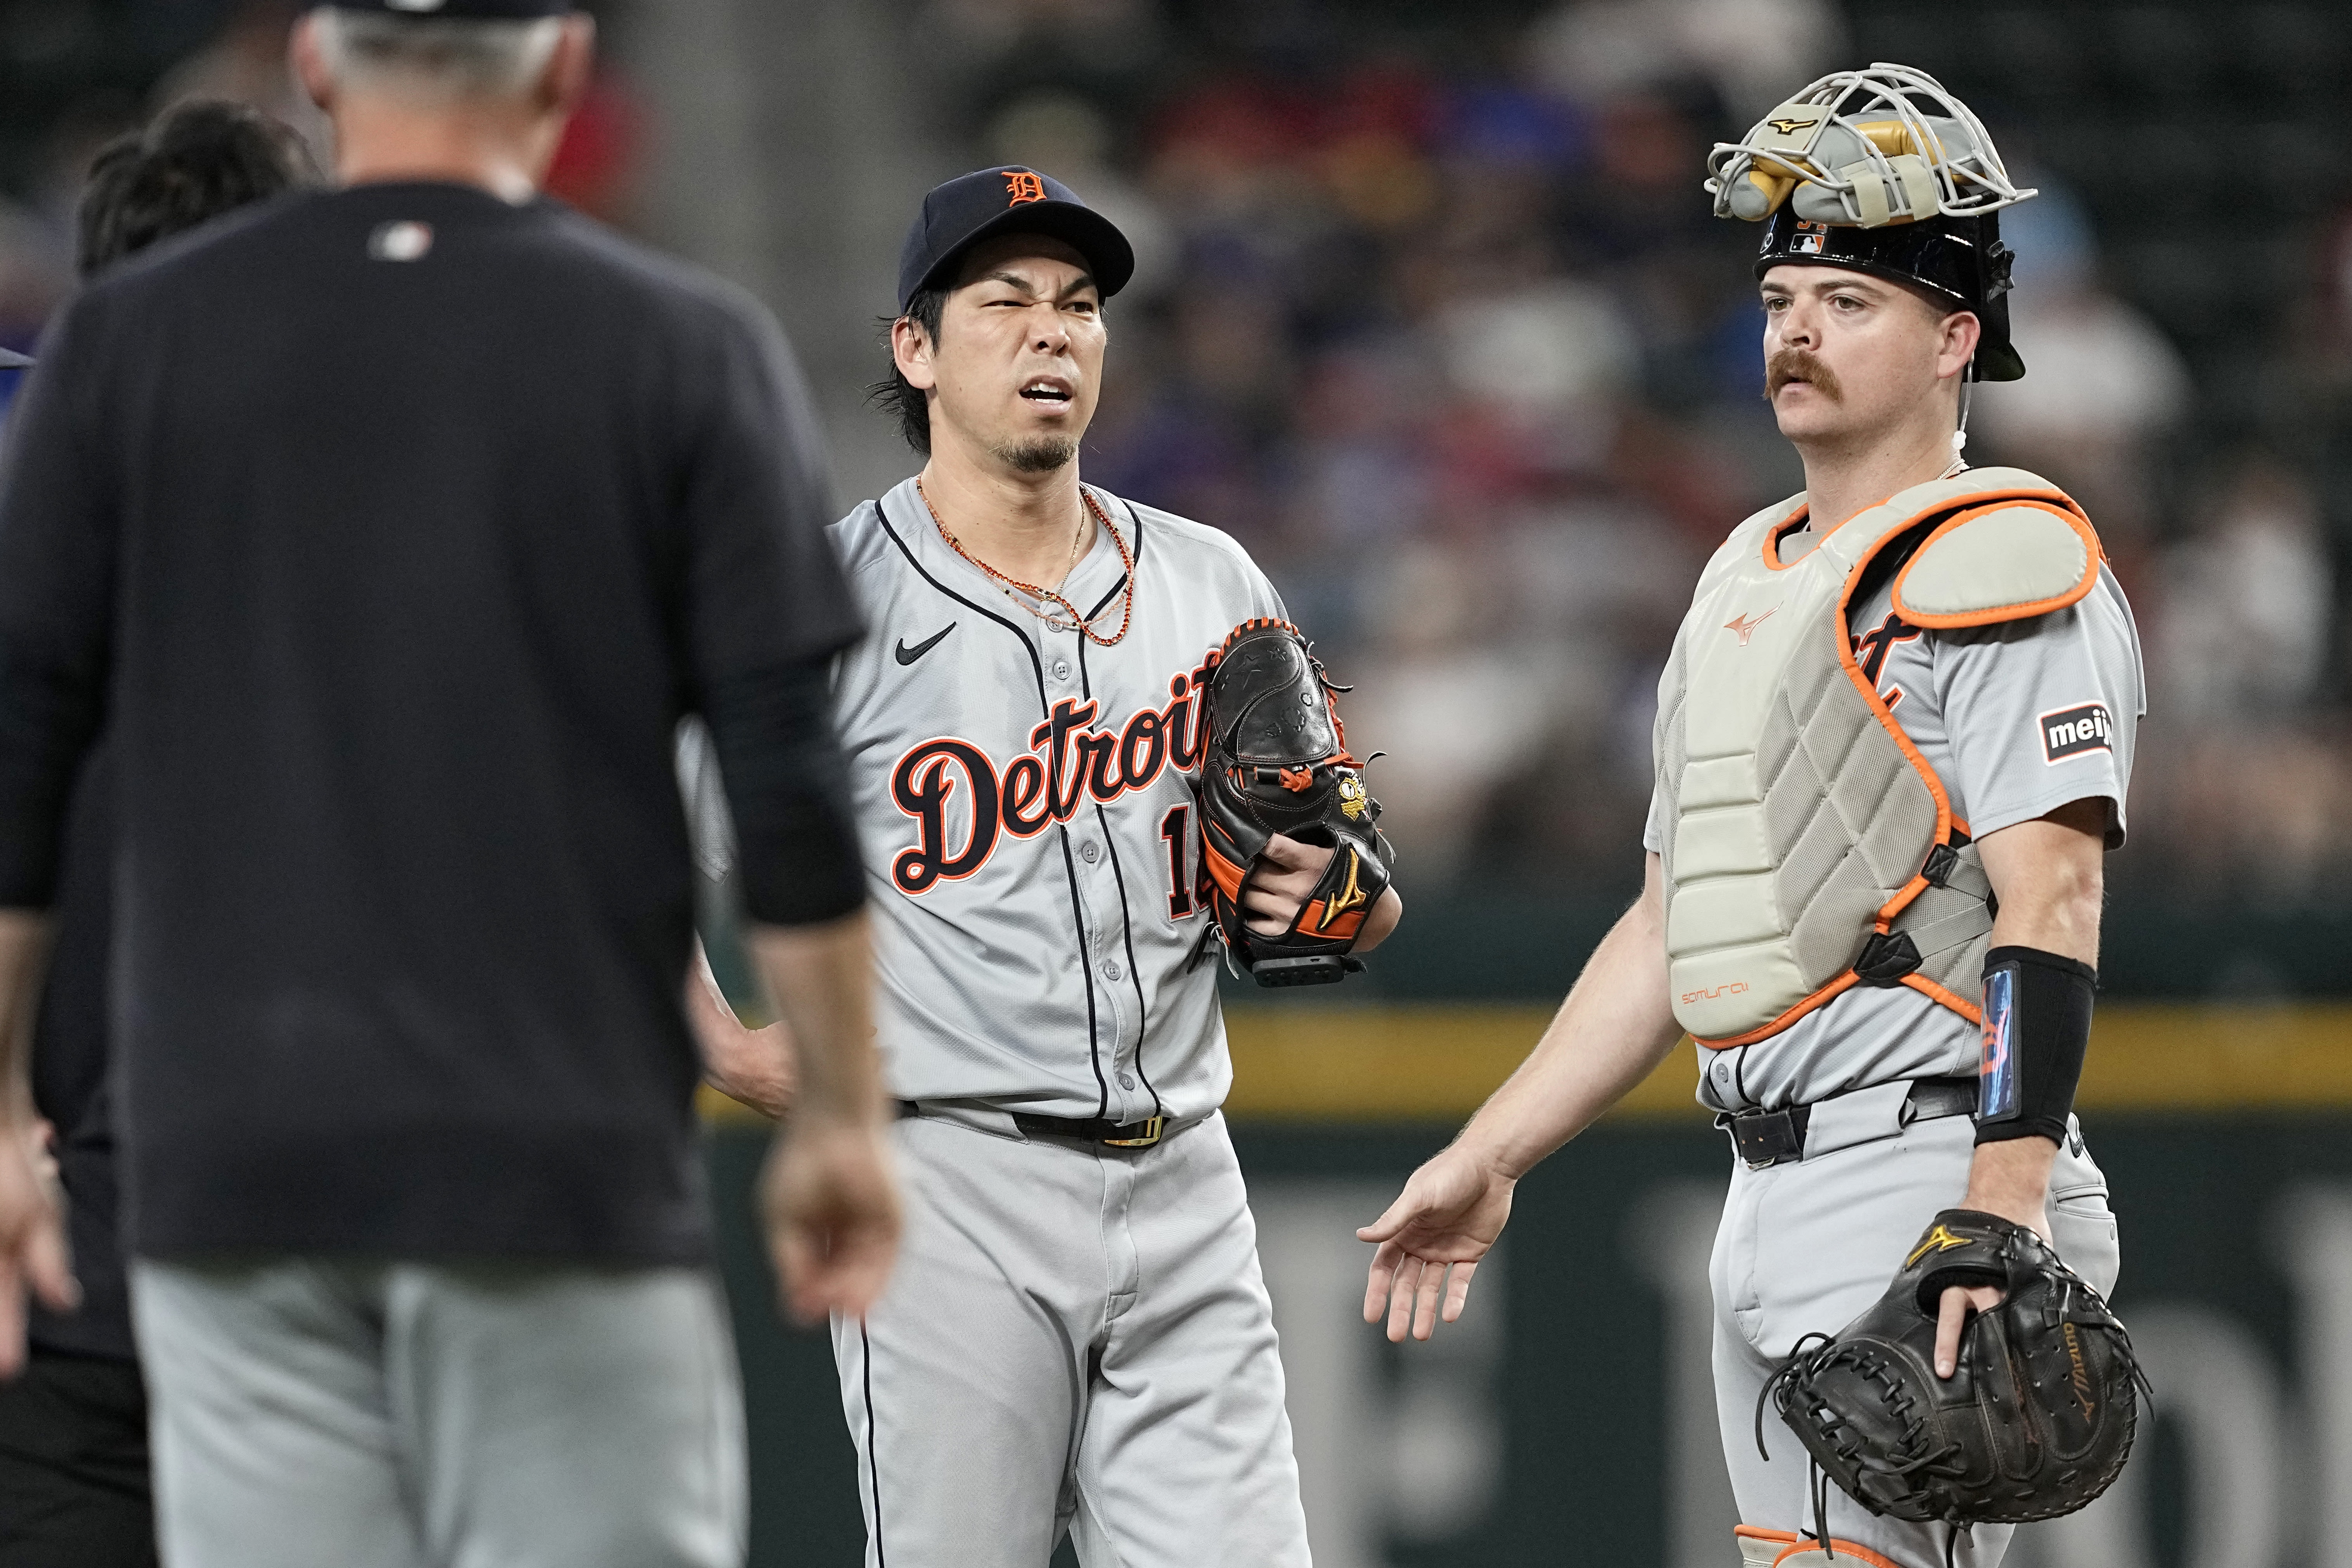 Detroit Tigers' Kenta Maeda leaves game with apparent injury after throwing 2 pitches